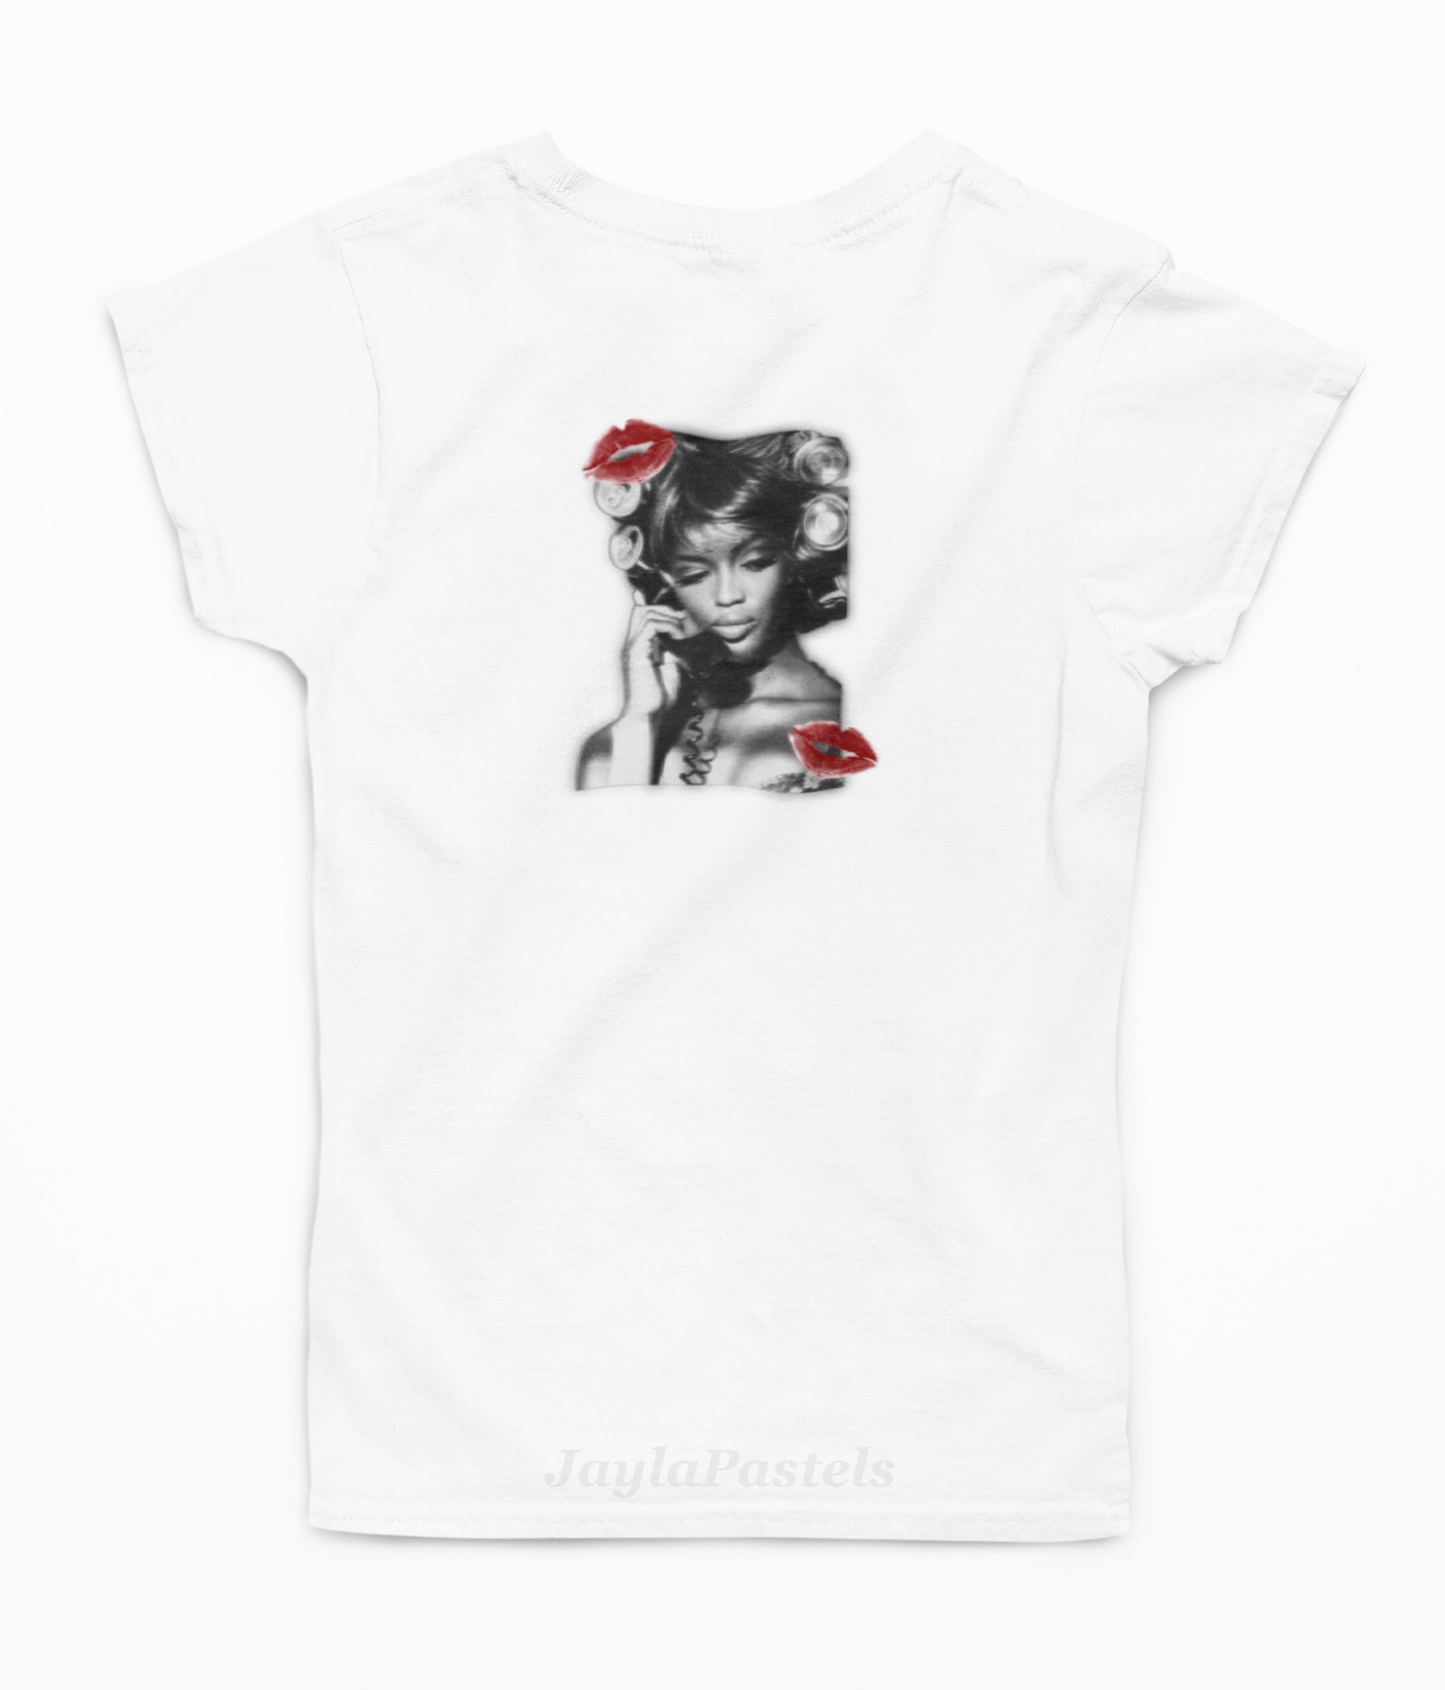 Getting Ready White Baby Tee